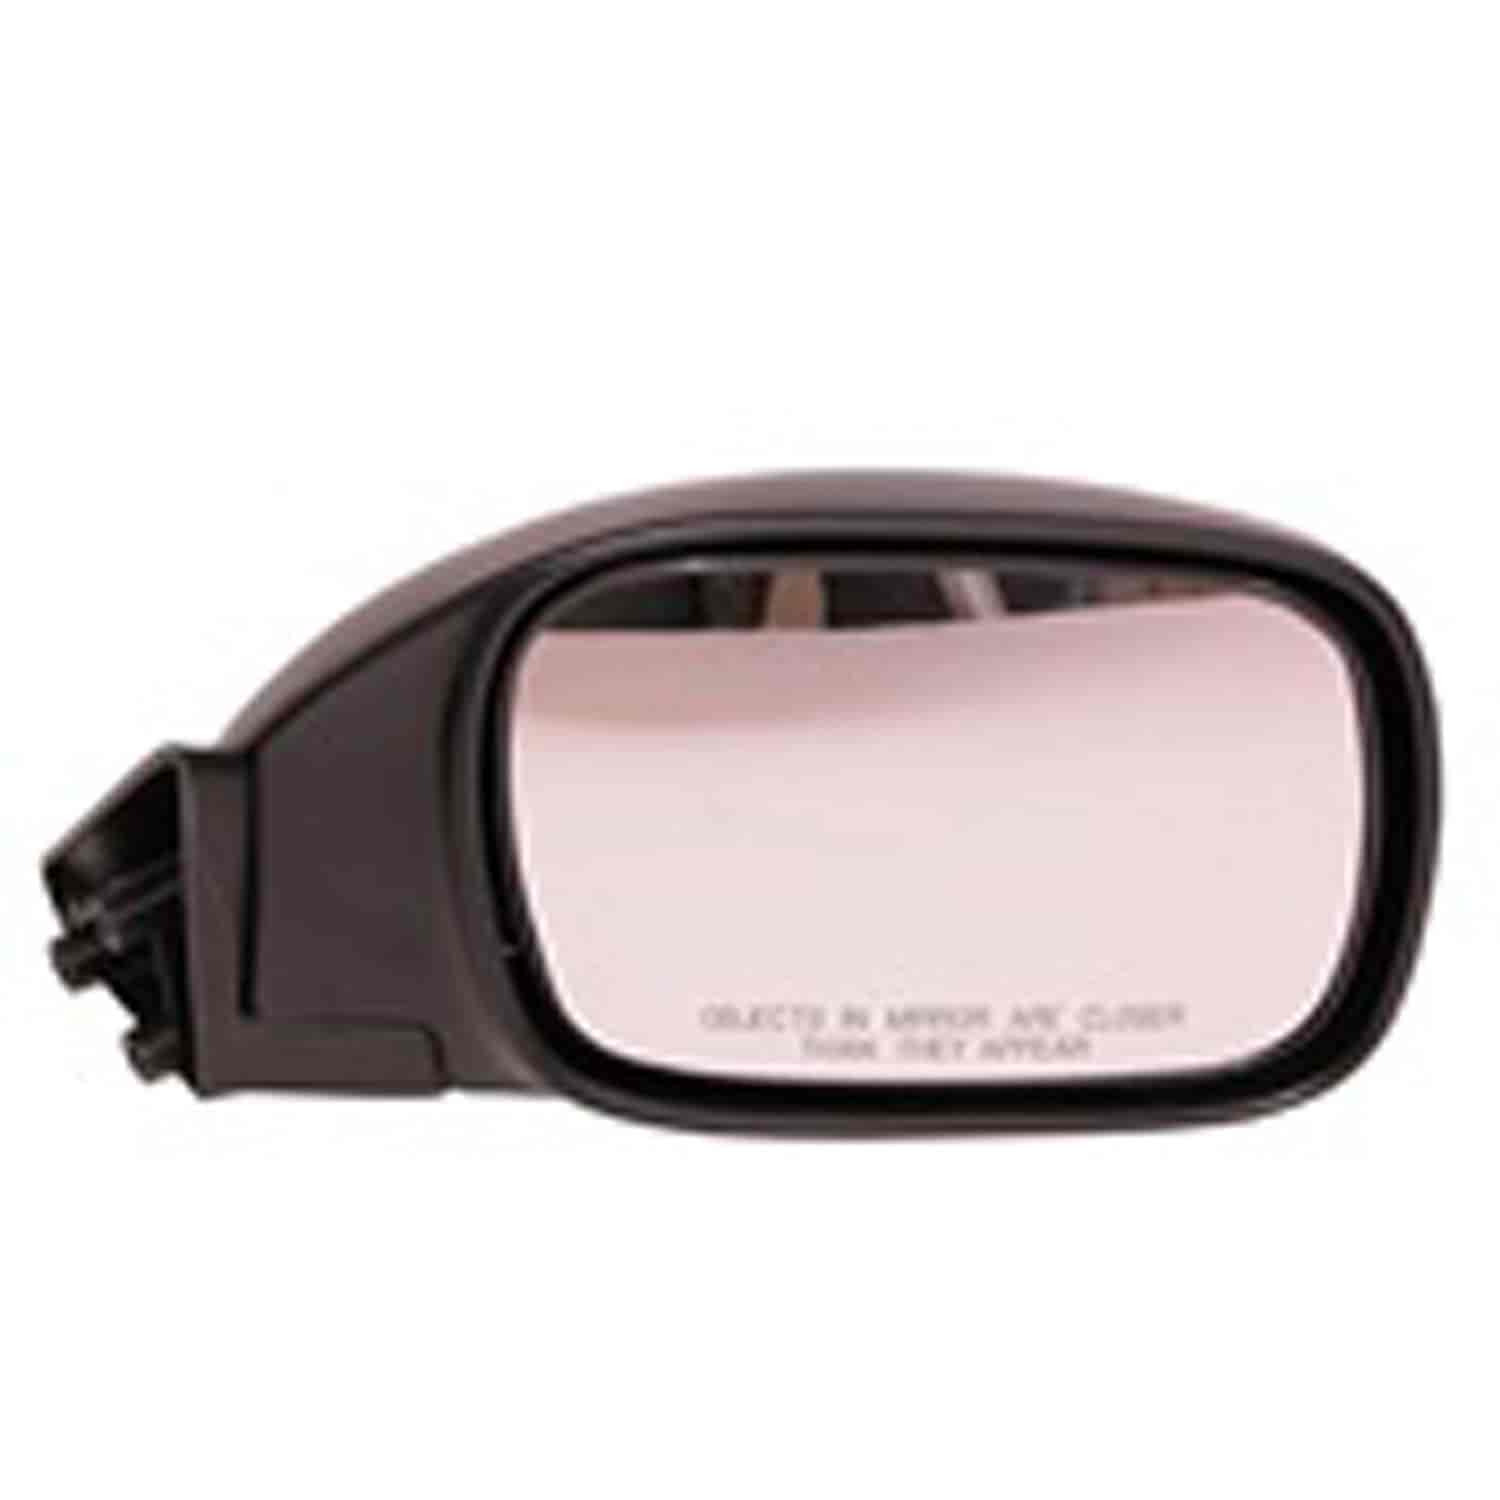 This black folding door mirror from Omix-ADA fits the right door on 97-01 Jeep Cherokee XJ. Connects